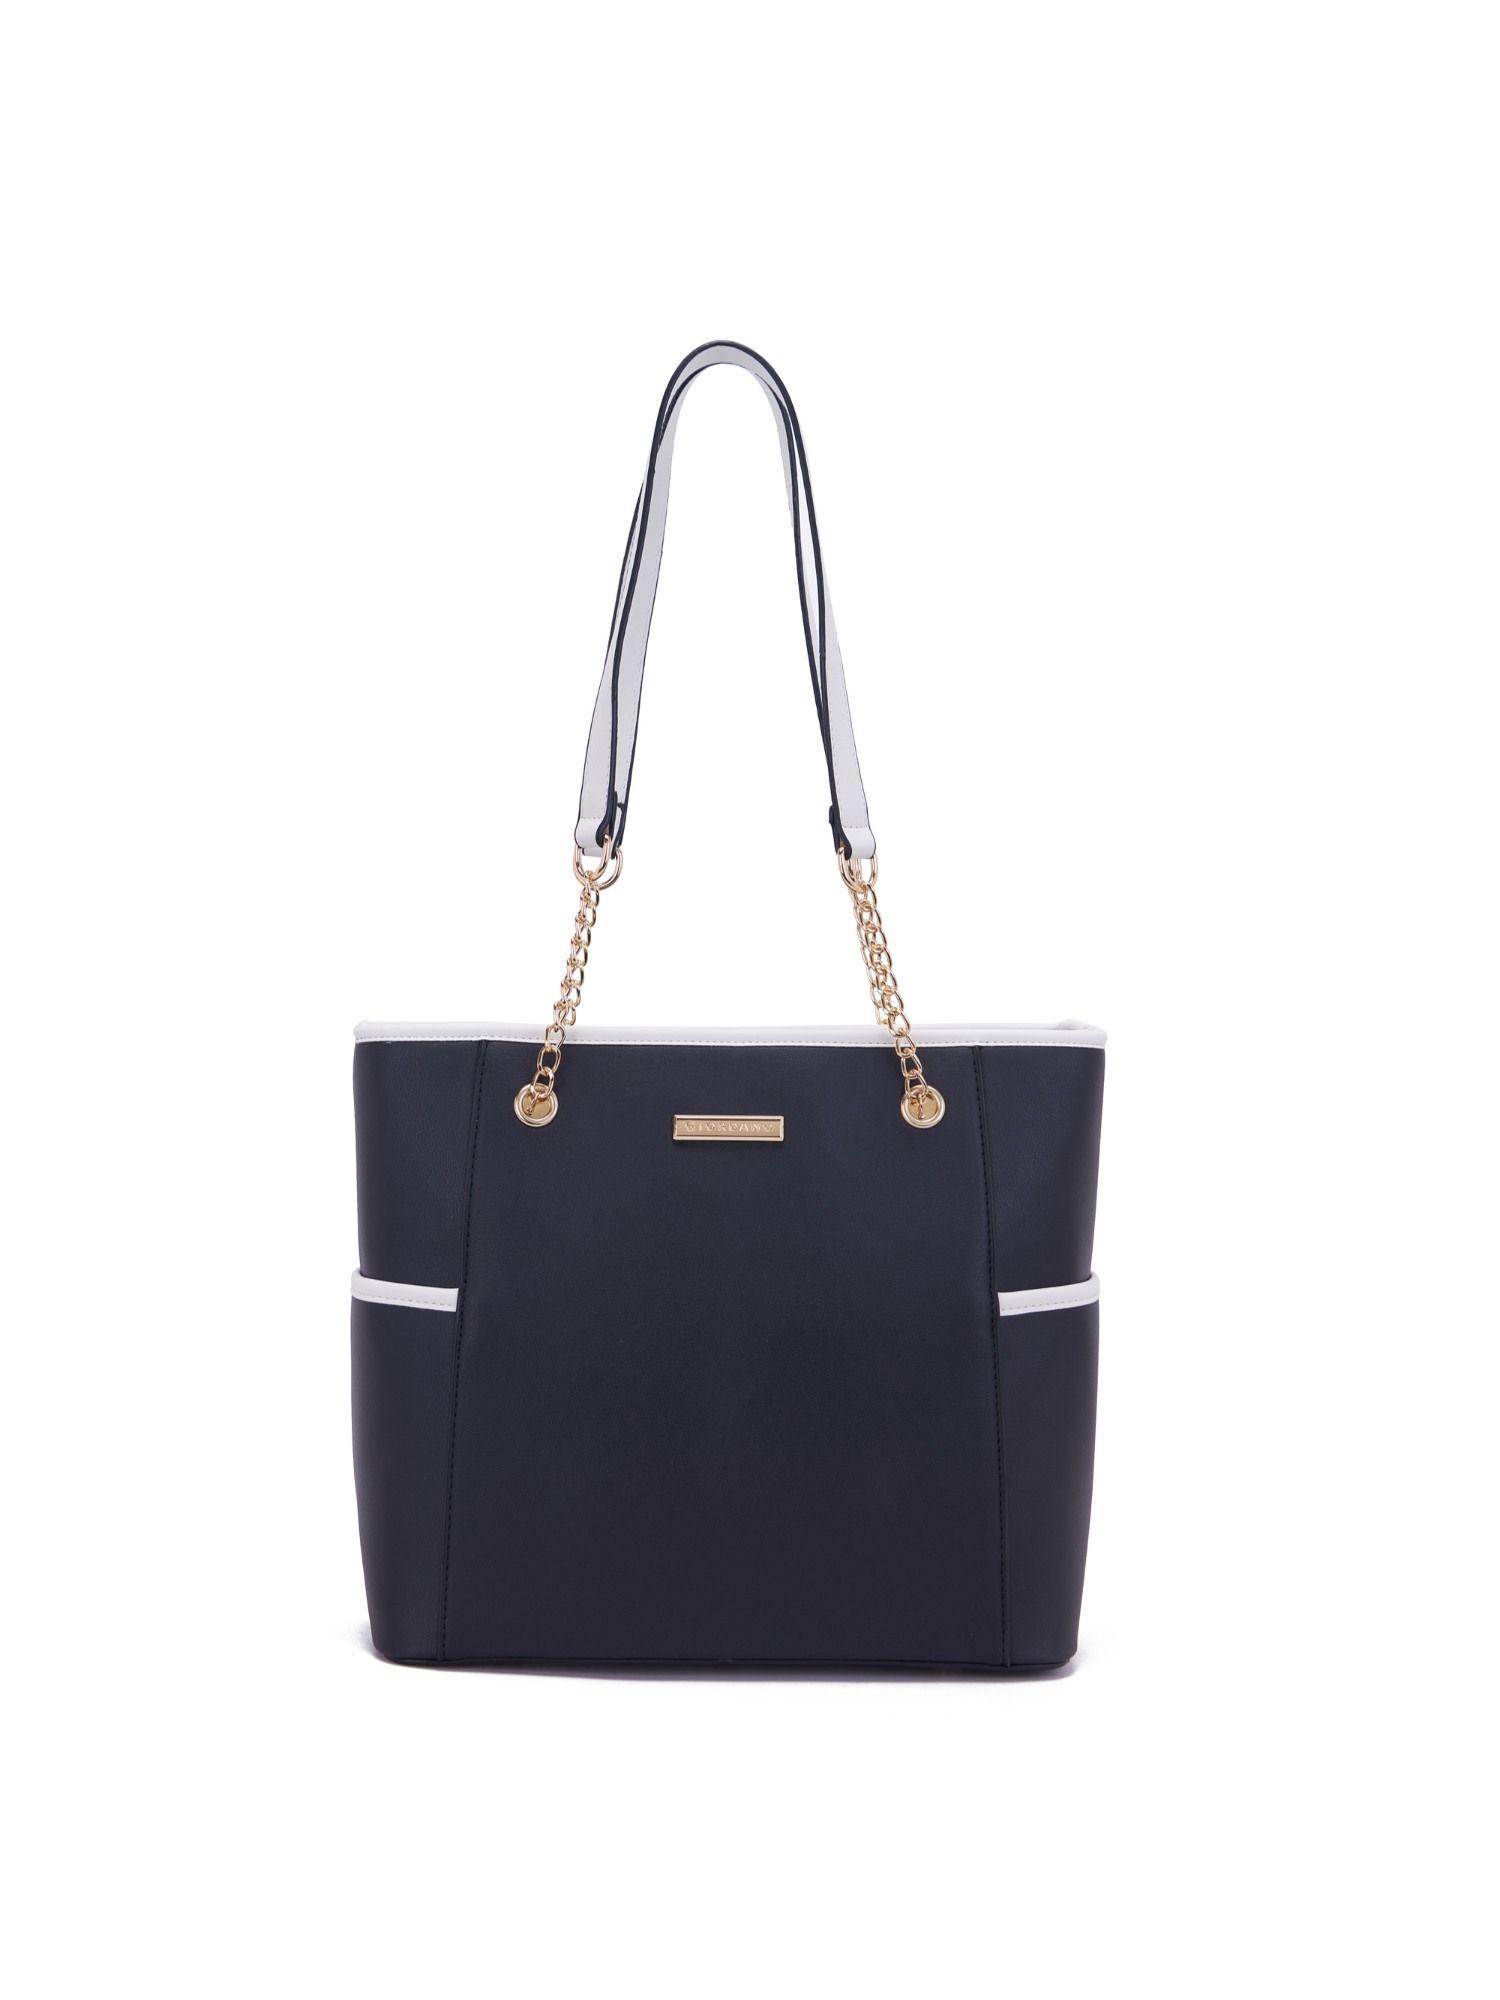 women tote bag with spacious compartment - black